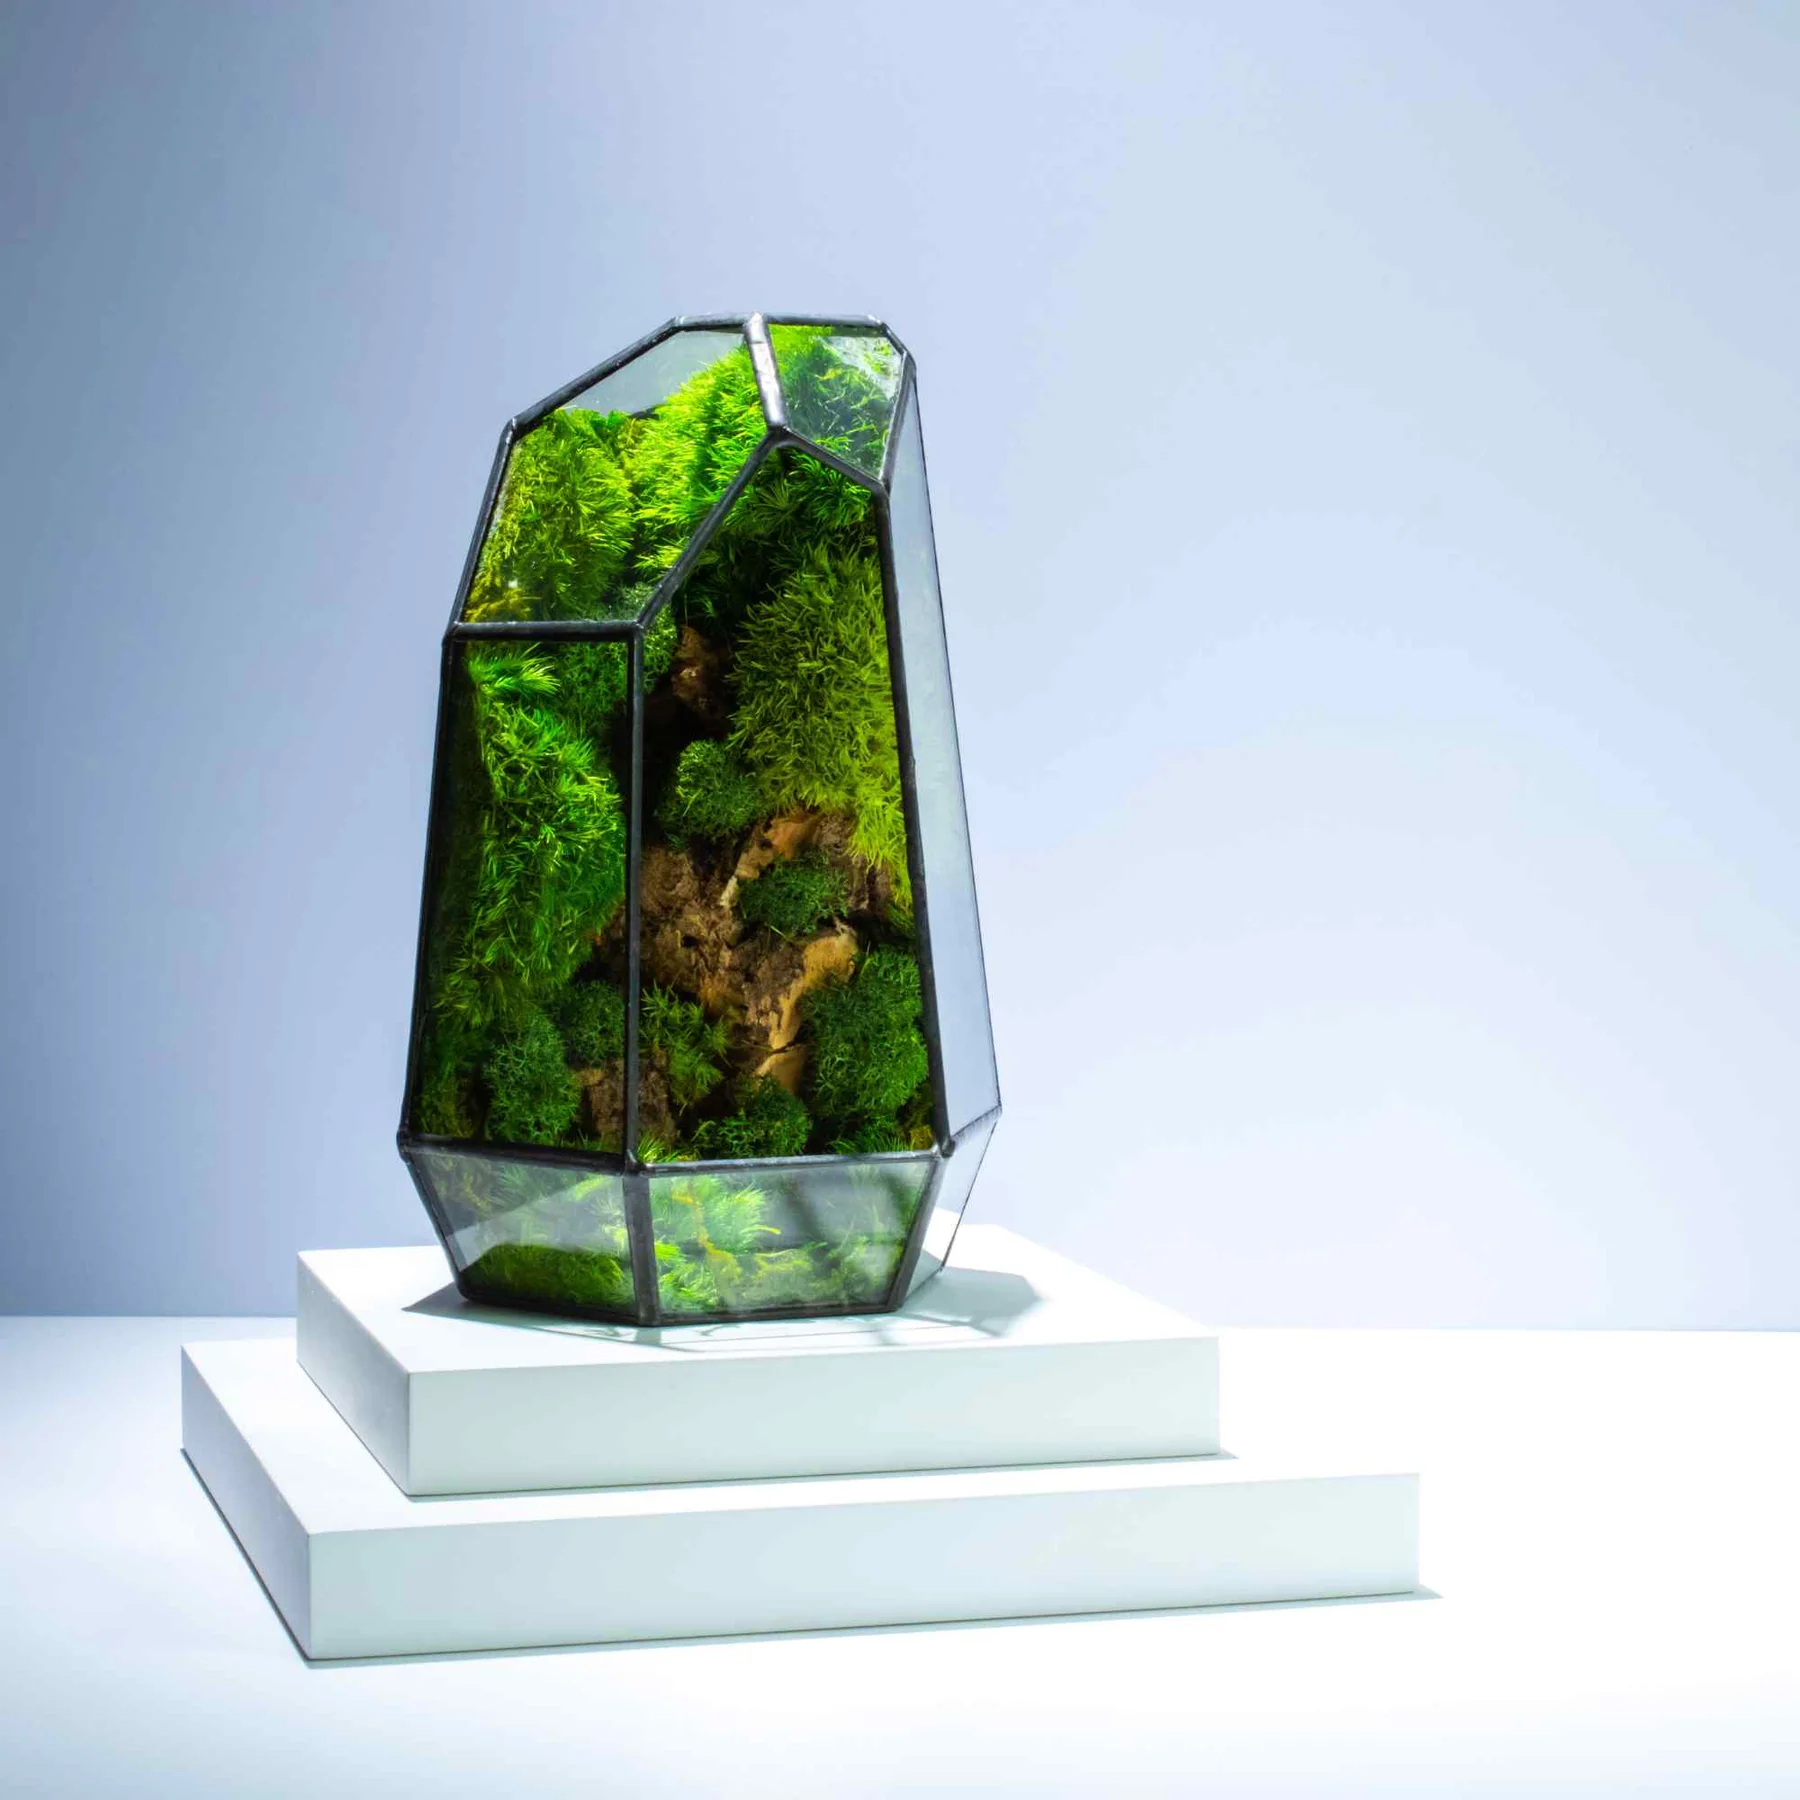 Read more about the article “Terrarium” A closed Ecosystem In Your Home